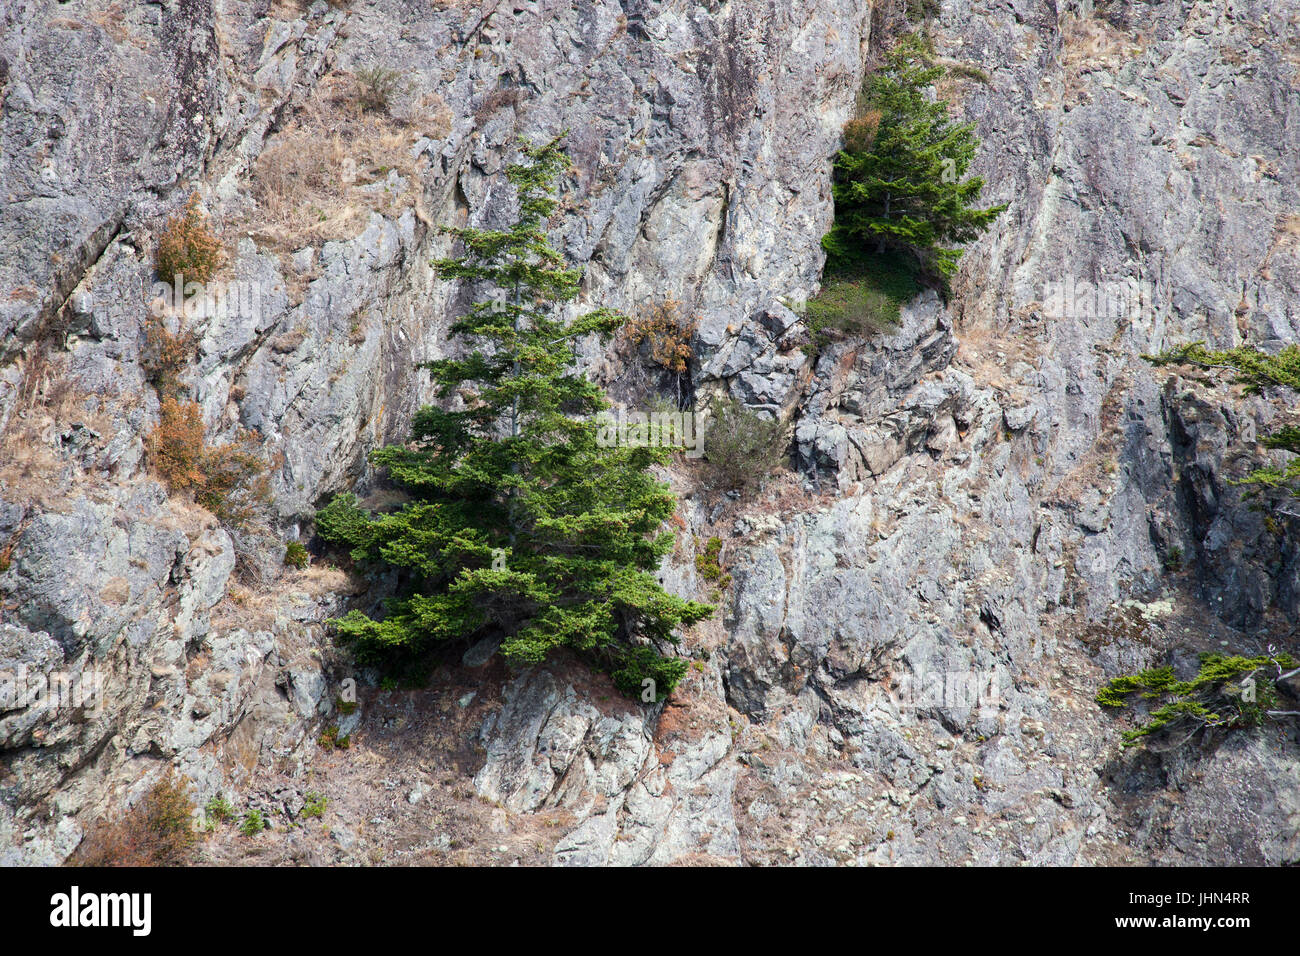 Trees grown on a steep rocky wall, Deception Pass and Deception State Park, Fidalgo Island and Whidbay Island, State of Washington, USA, America Stock Photo